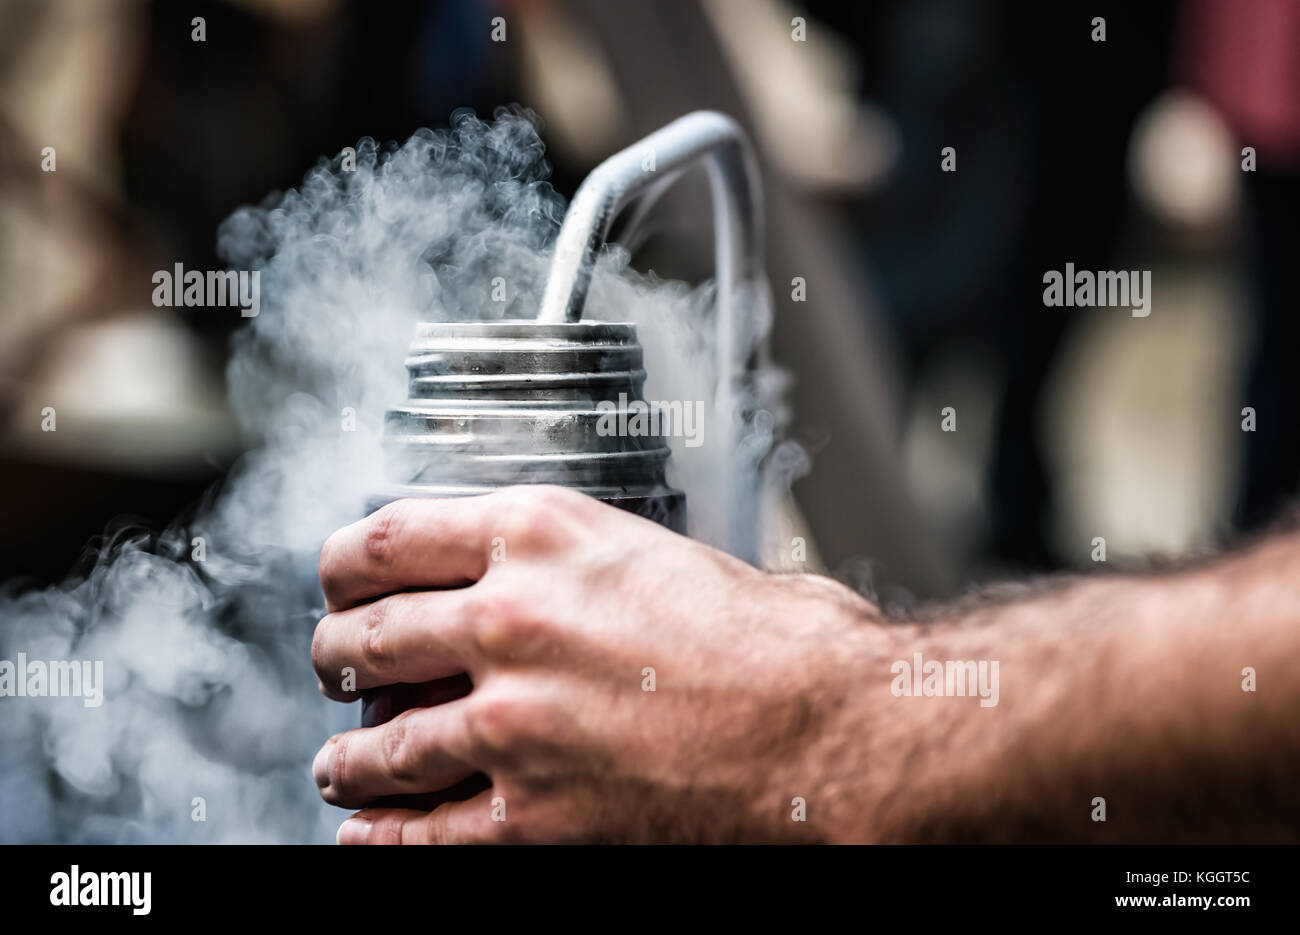 Filling the thermos with liquid nitrogen Stock Photo